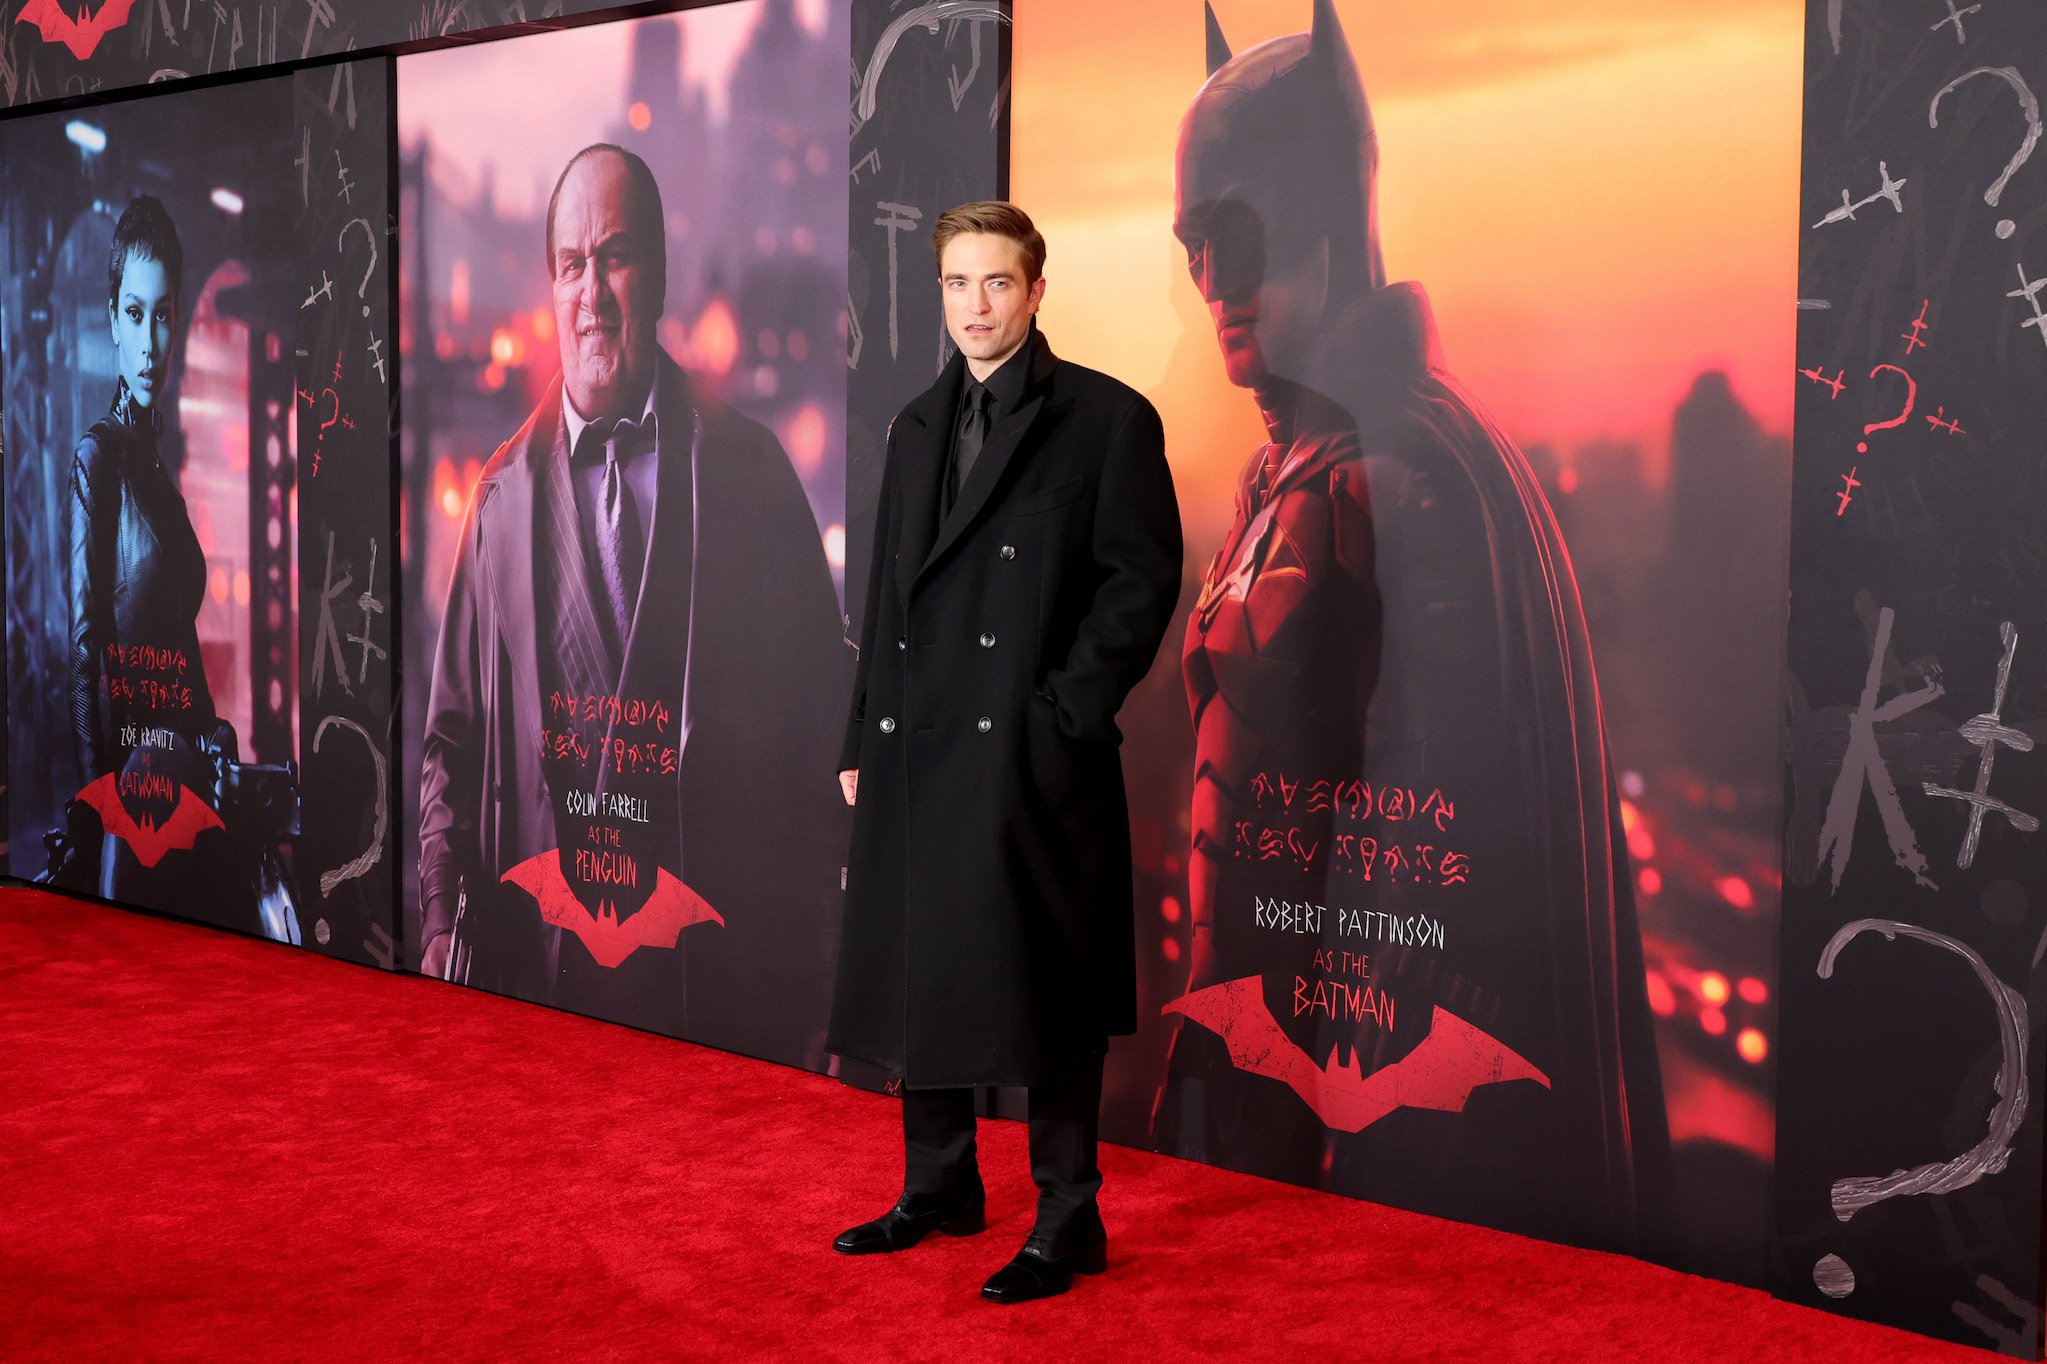 Robert Pattinson at the world premiere of 'The Batman' on March 1st in front of a poster for the film with the titular character